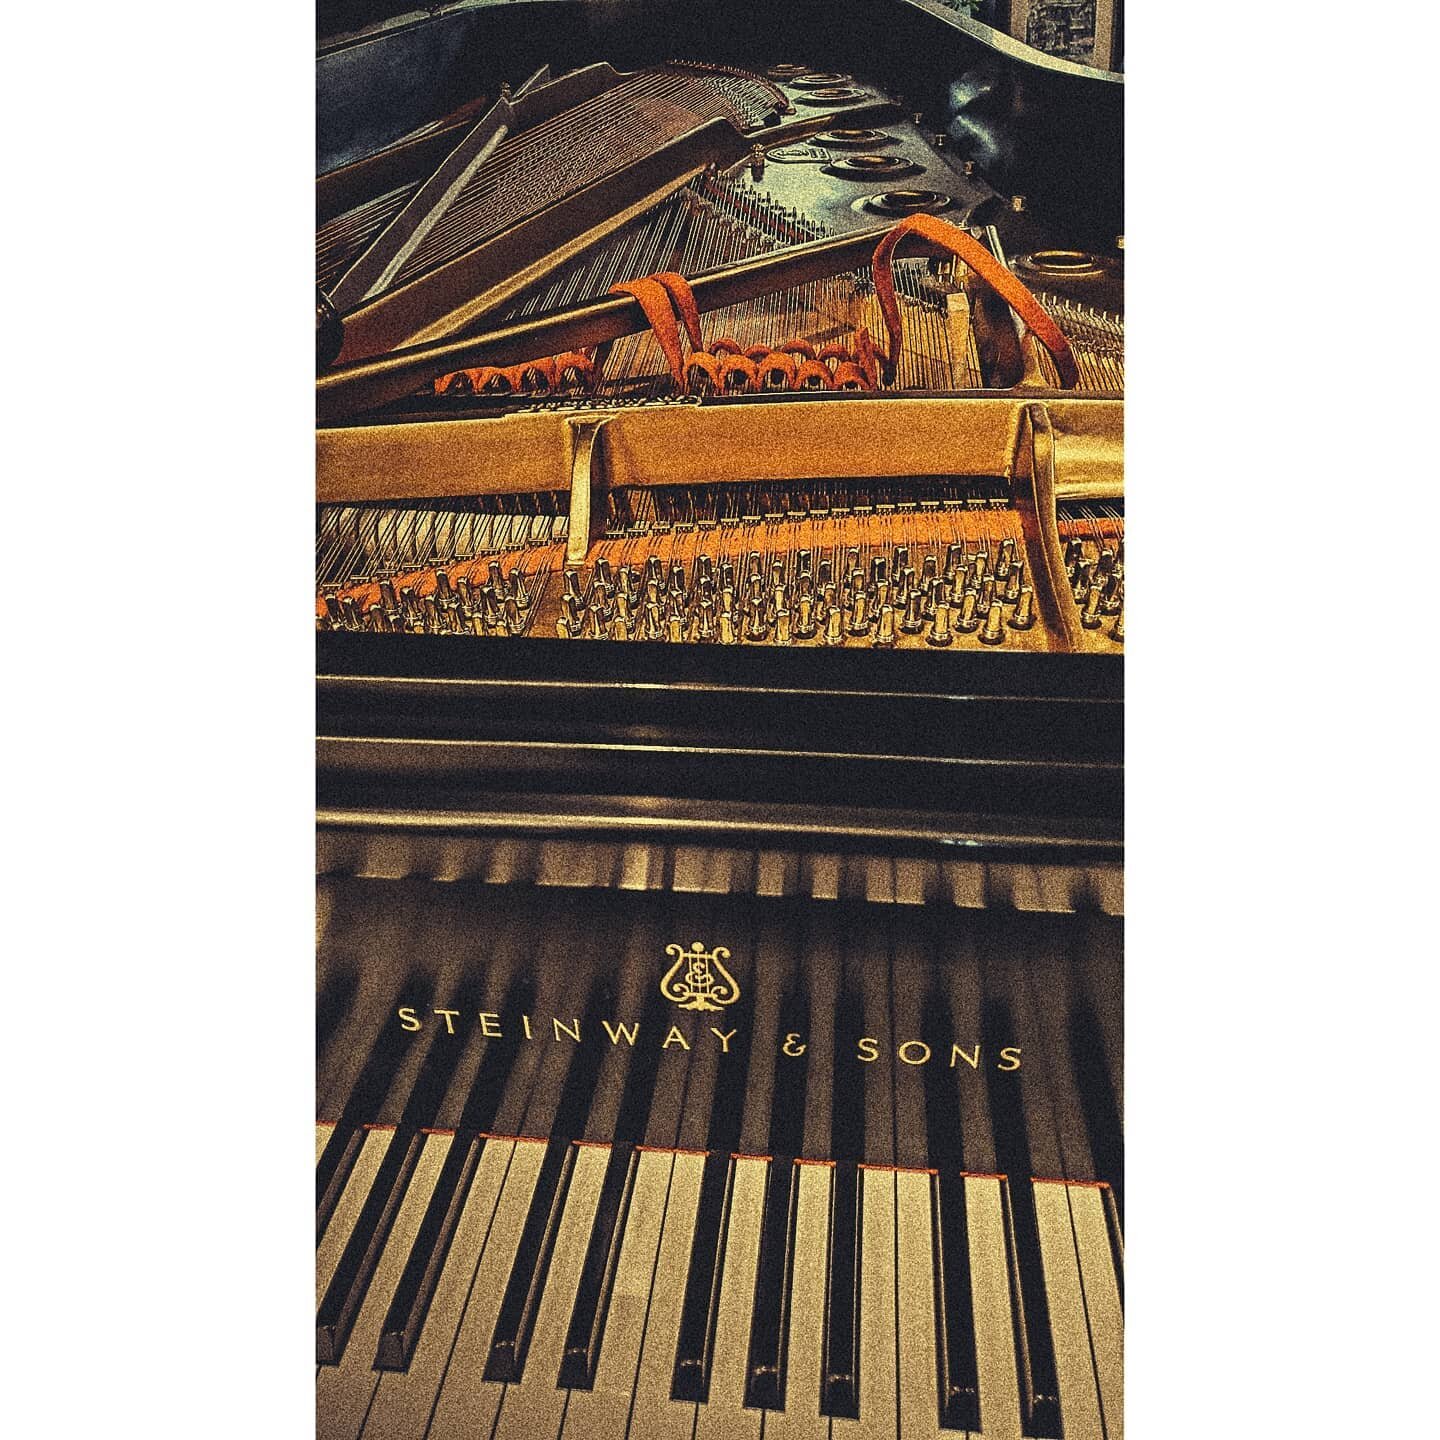 Big sound. Tuned 6 months ago and most of it barely moved at all 🙏 #steinway #concertgrand